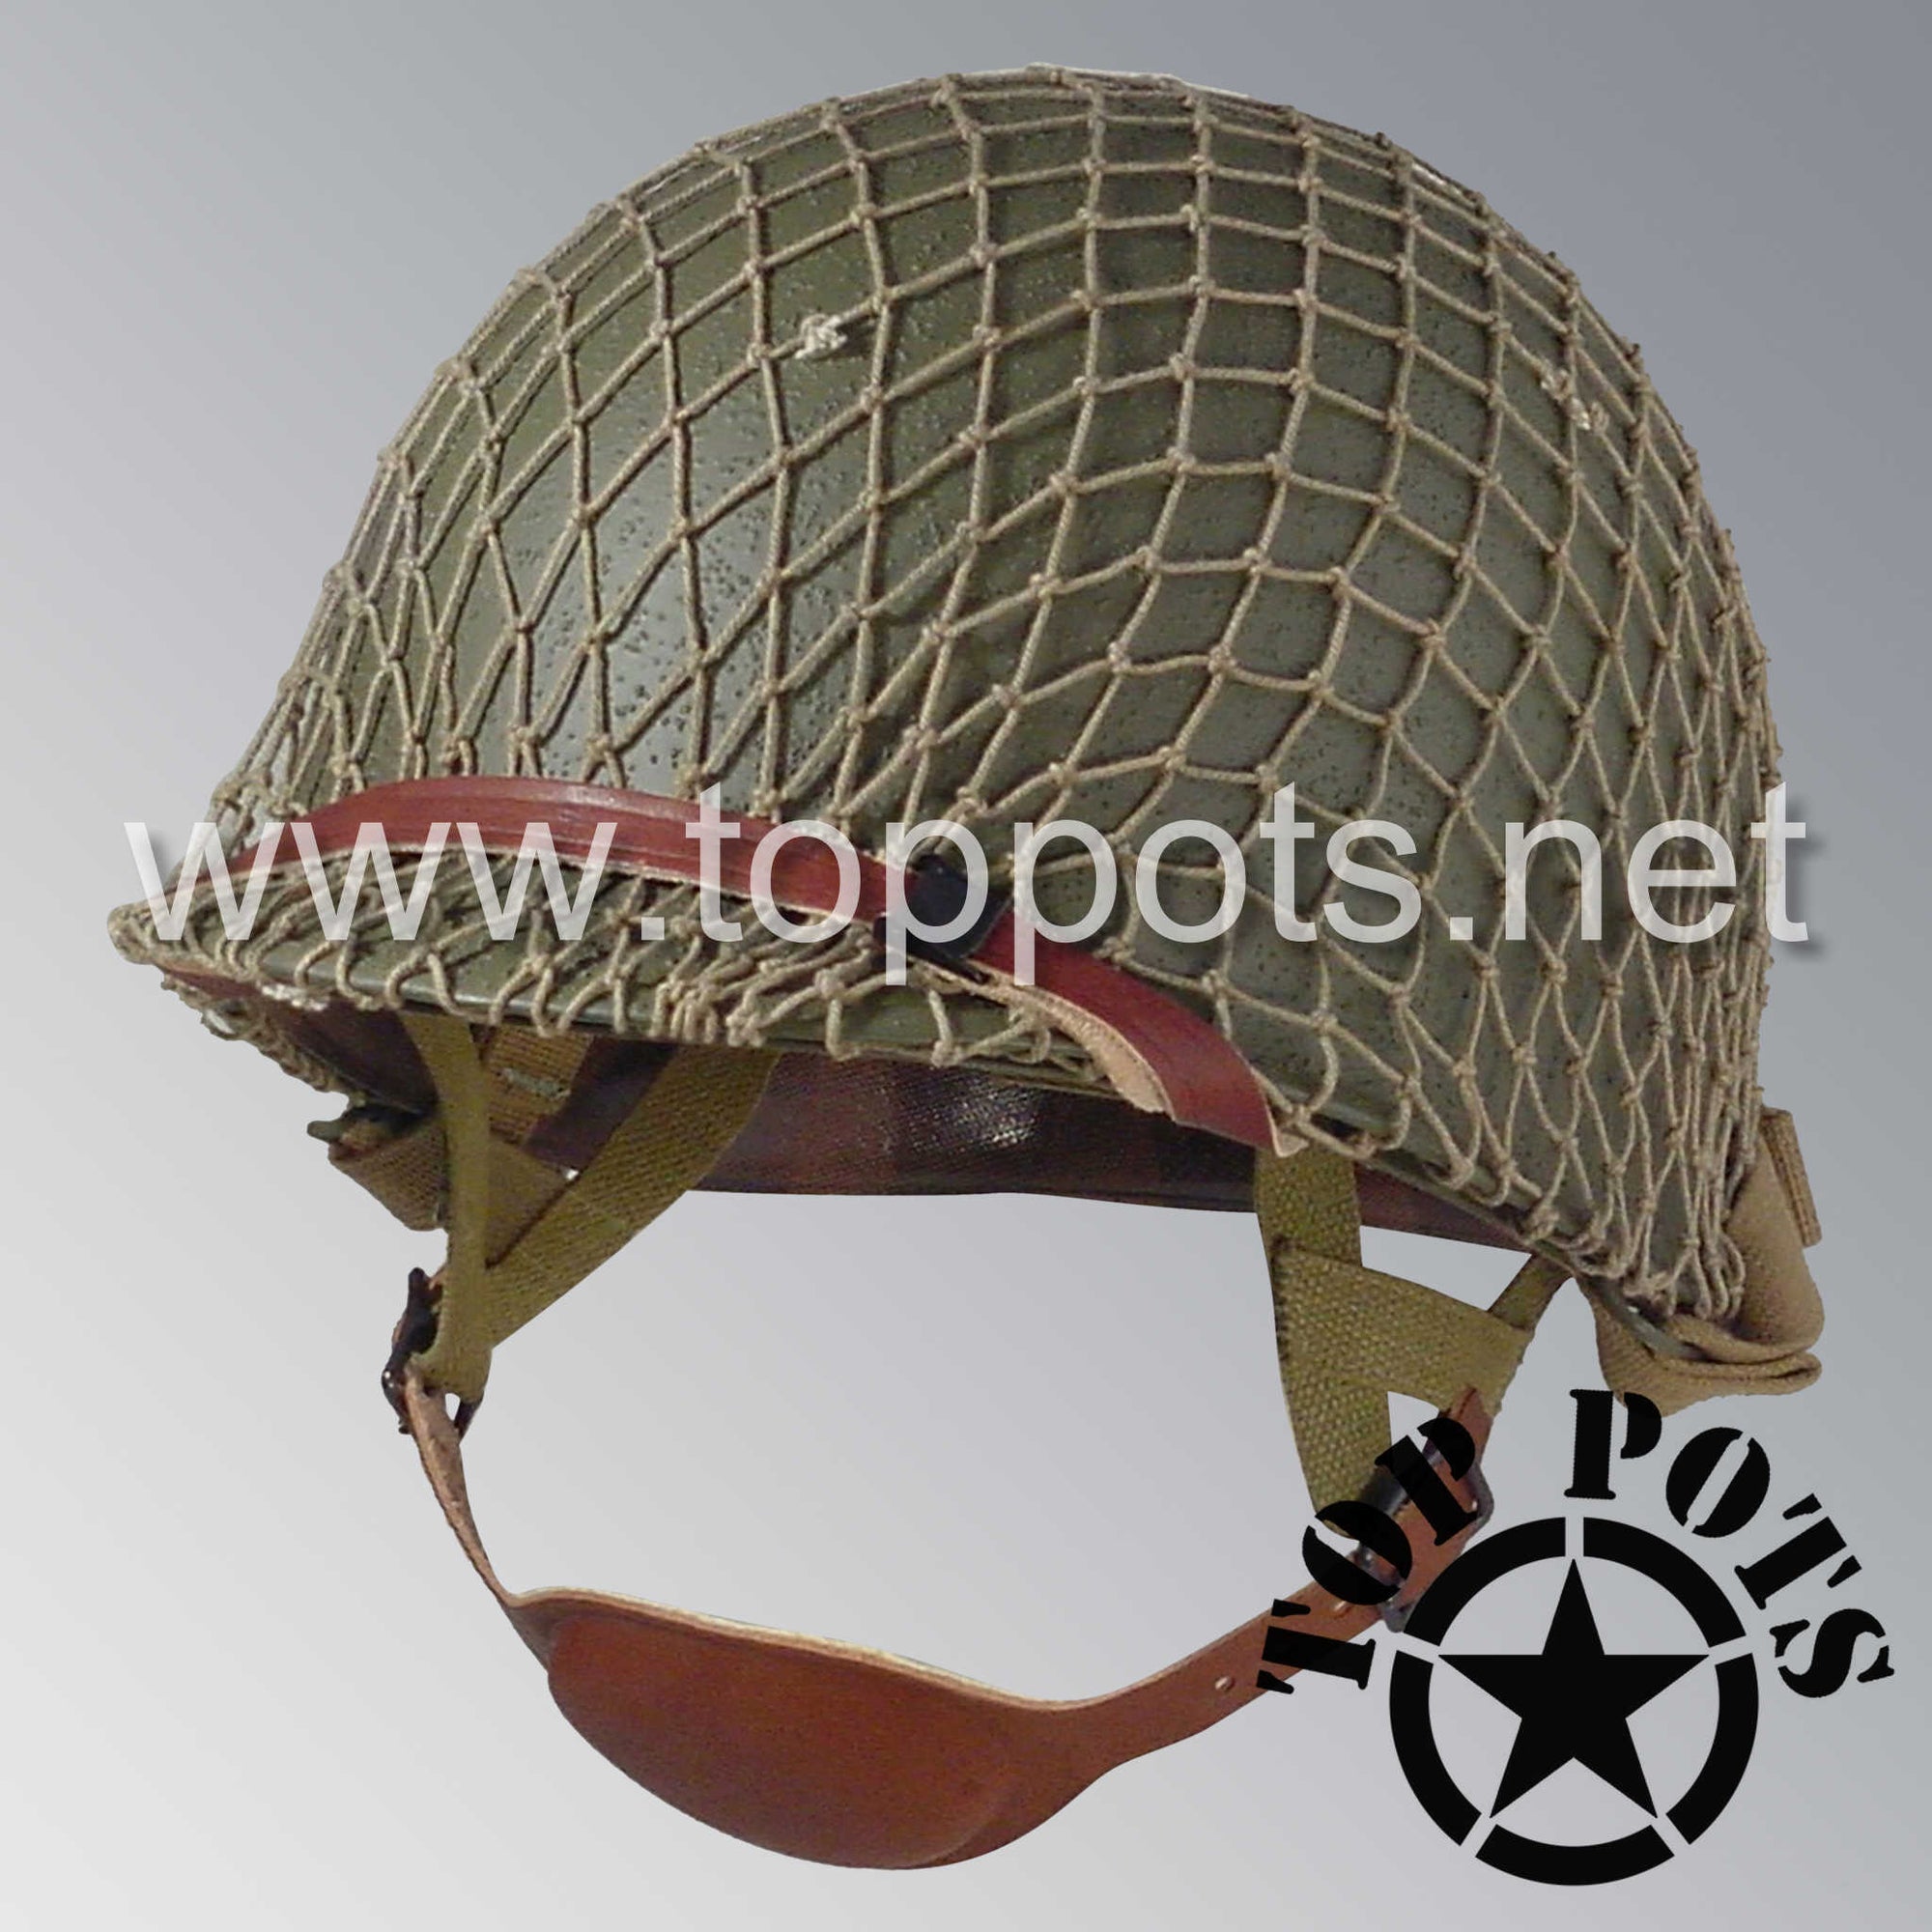 WWII US Army Restored Original M1C Paratrooper Airborne Helmet Swivel Bale Shell and Liner with Khaki Net